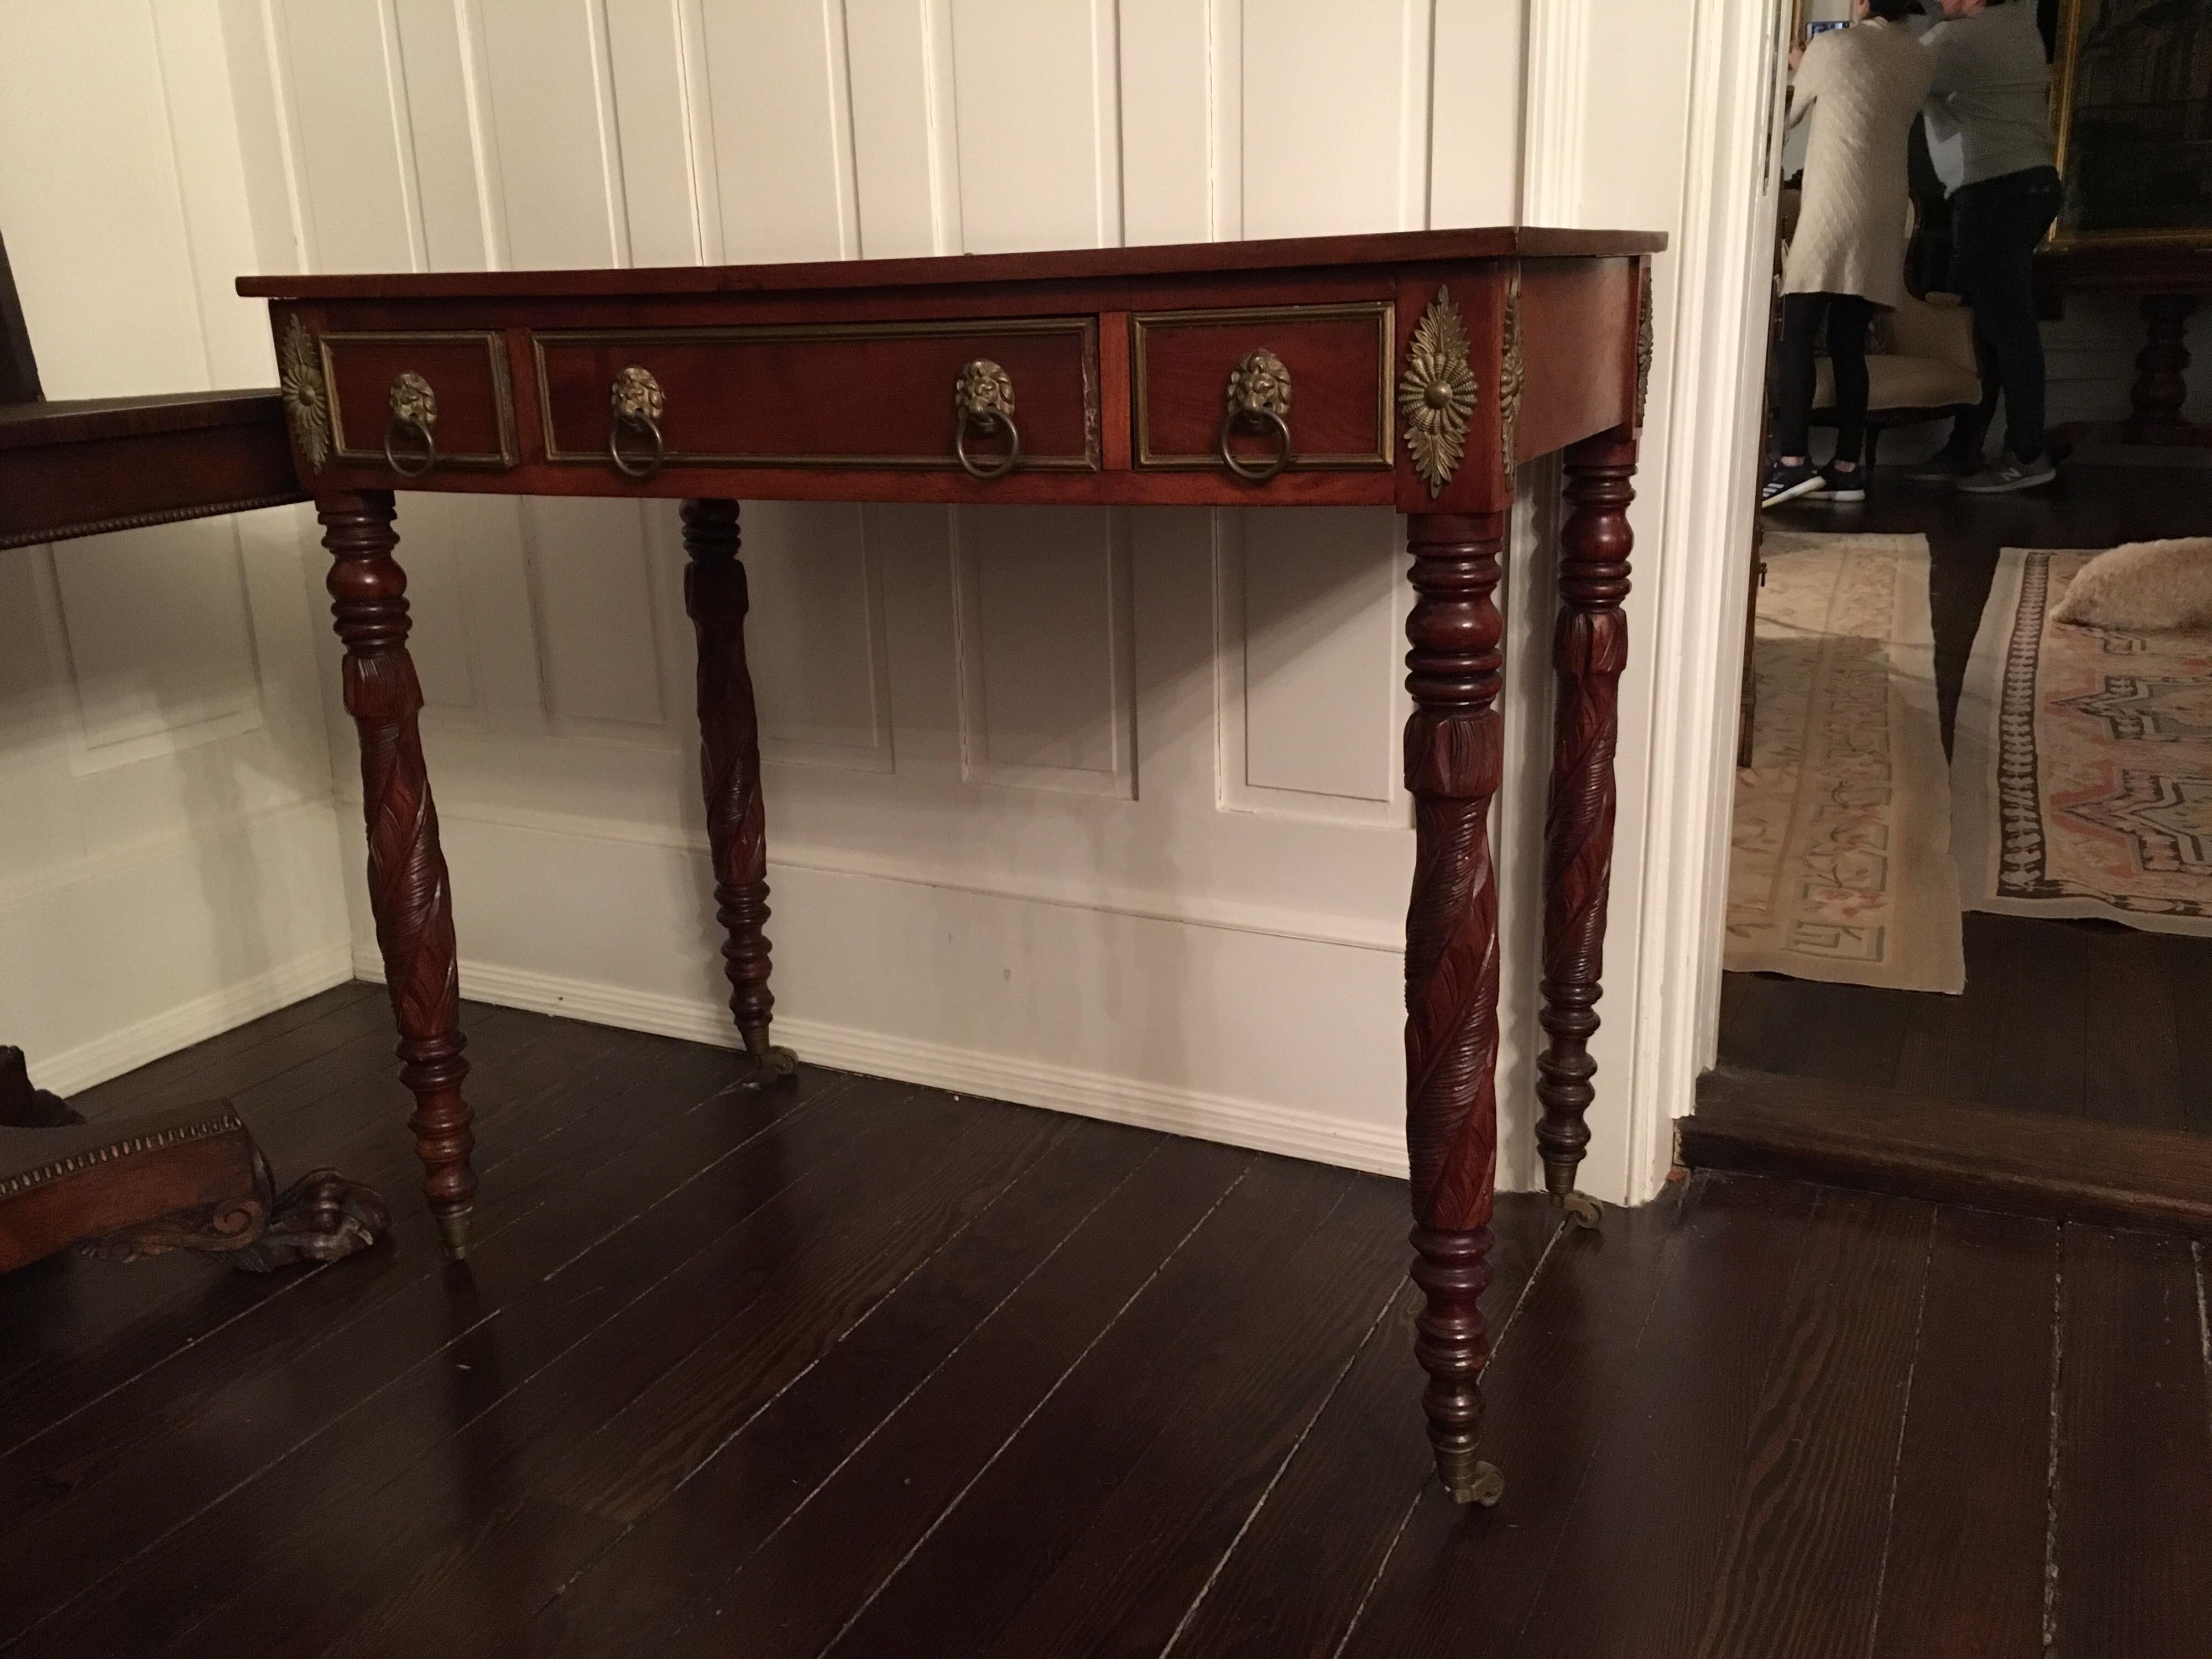 American empire writing table with carved acanthus legs, circa 1840
Casters, Missing ormolu on right side of centre drawer. Beautiful ornately carved acanthus legs with casters with heavy ormolu detailing around drawers.

25